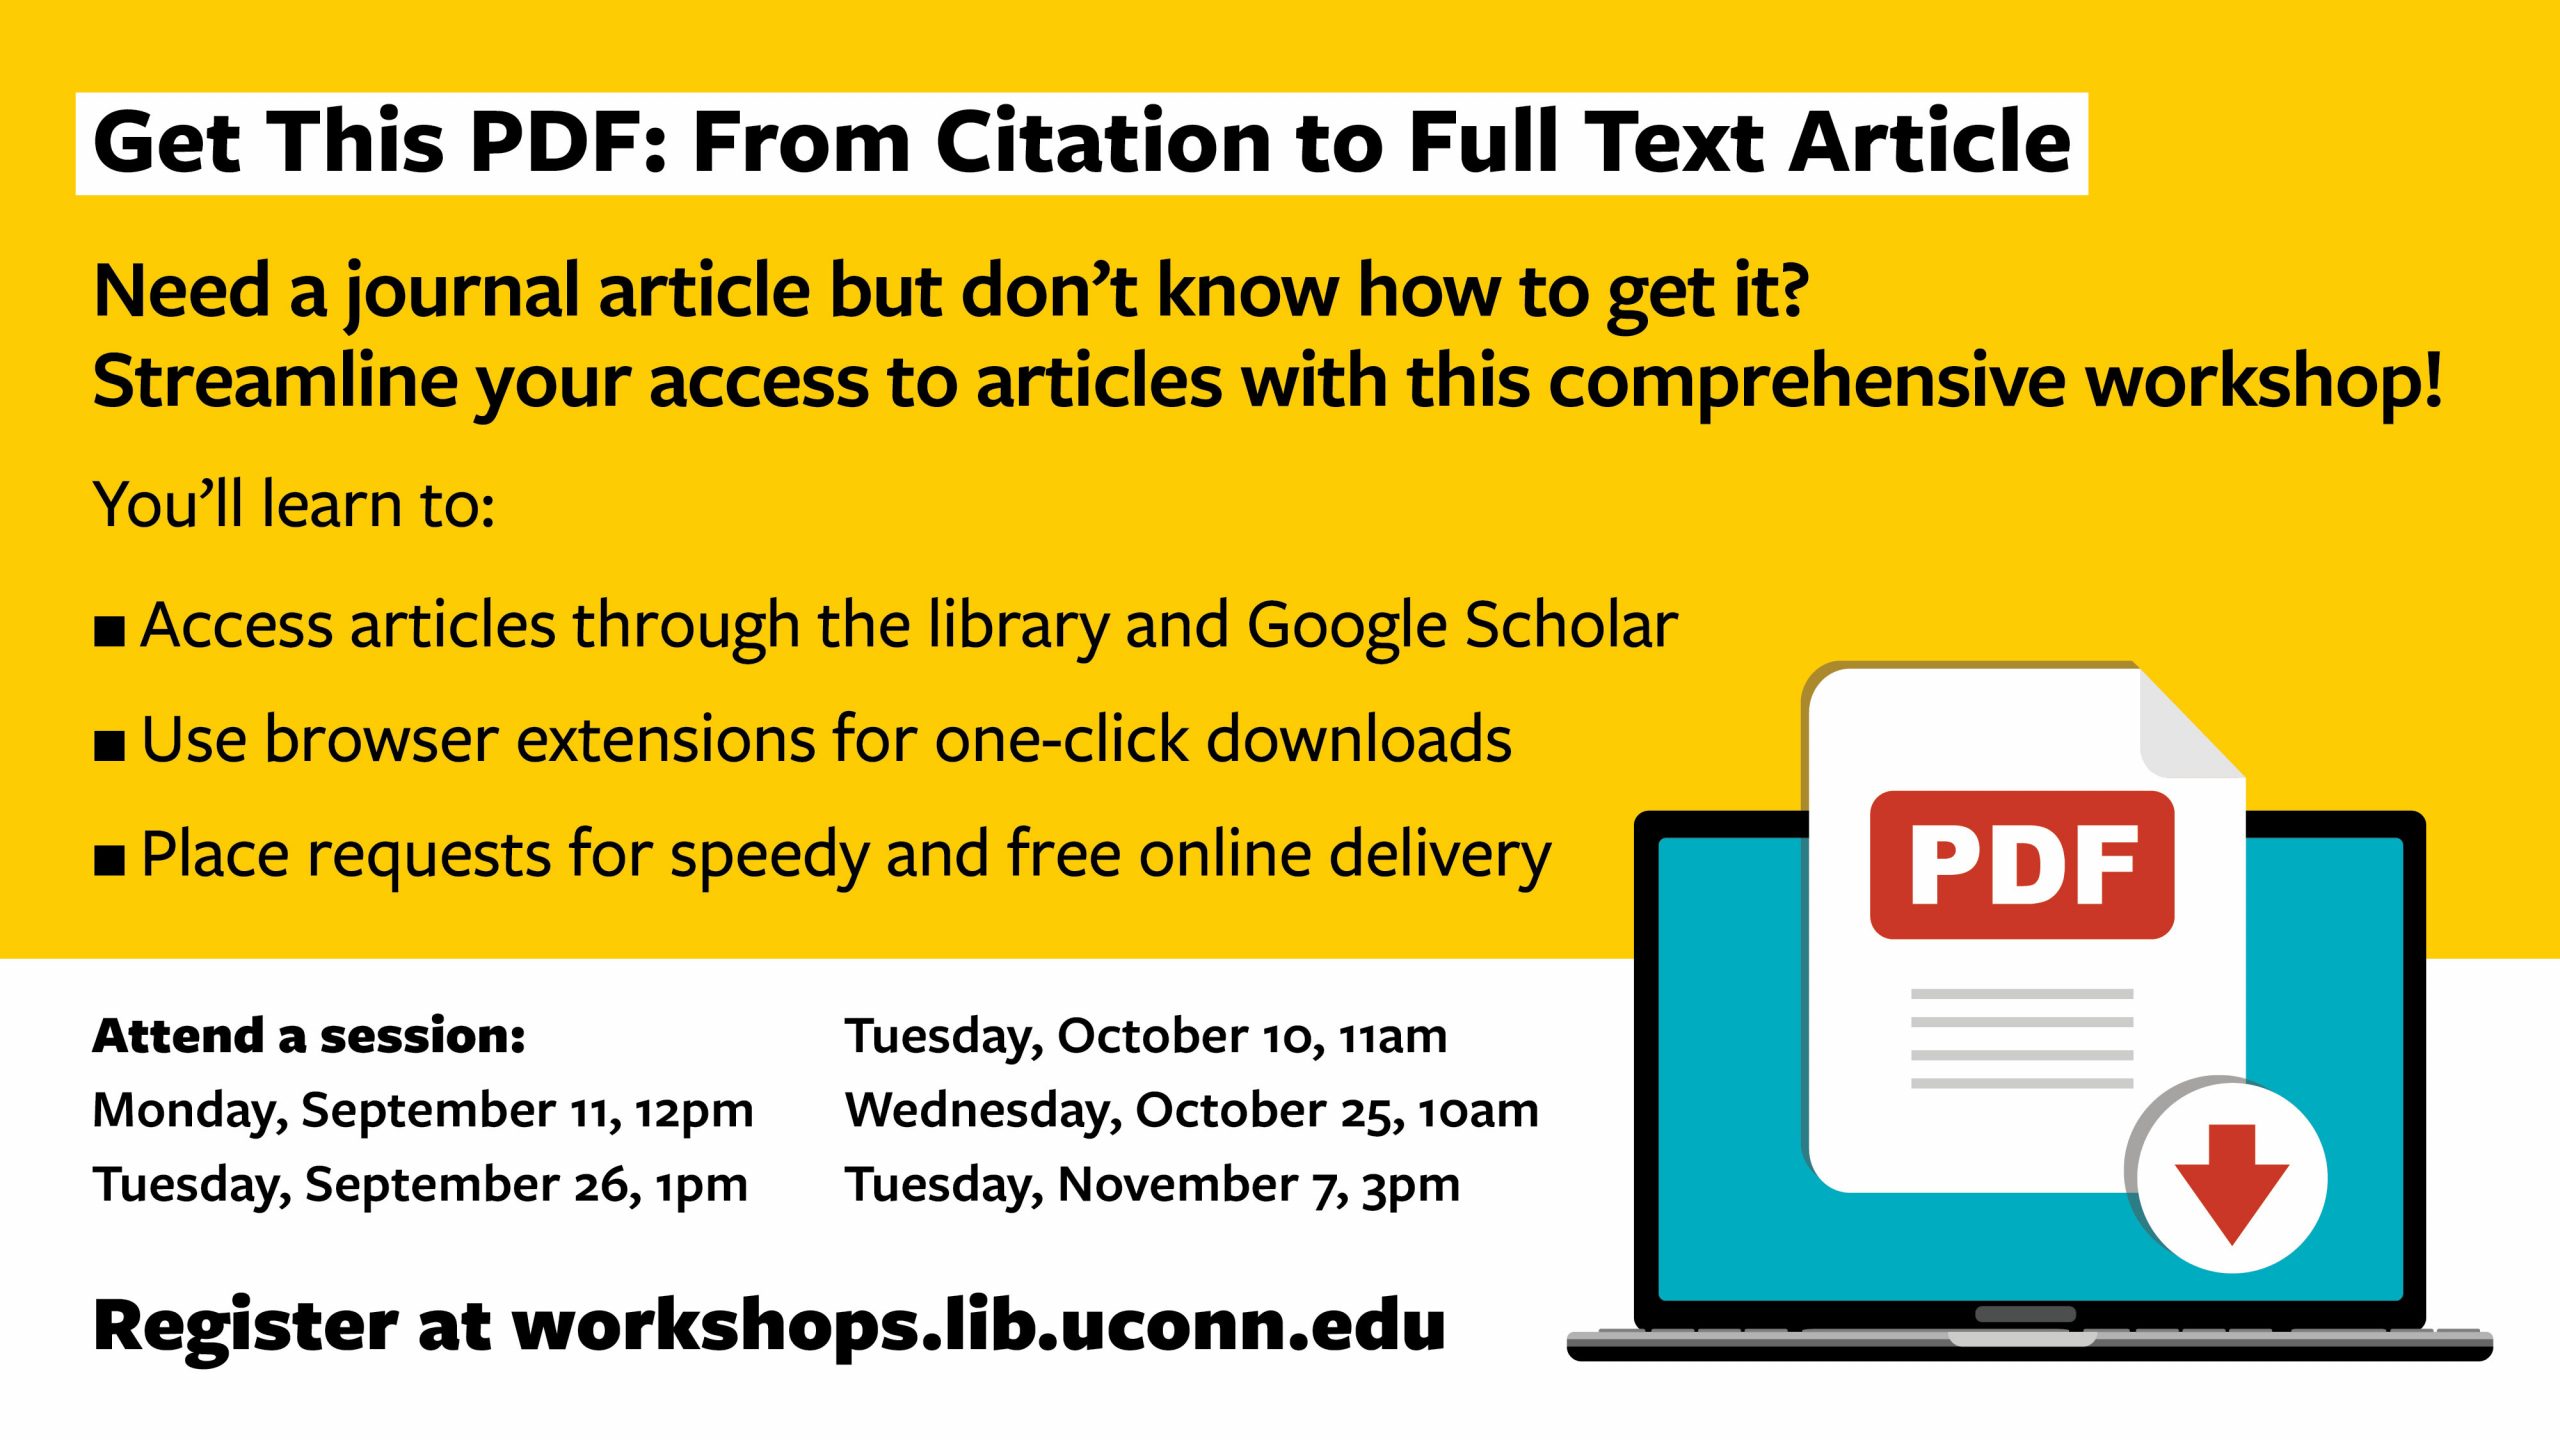 Need a journal article but don't know how to get it? Attend our workshop called "Get This PDF: From Citation to Full Text Article. Dates and registration for Fall Semester are on workshops.lib.uconn.edu